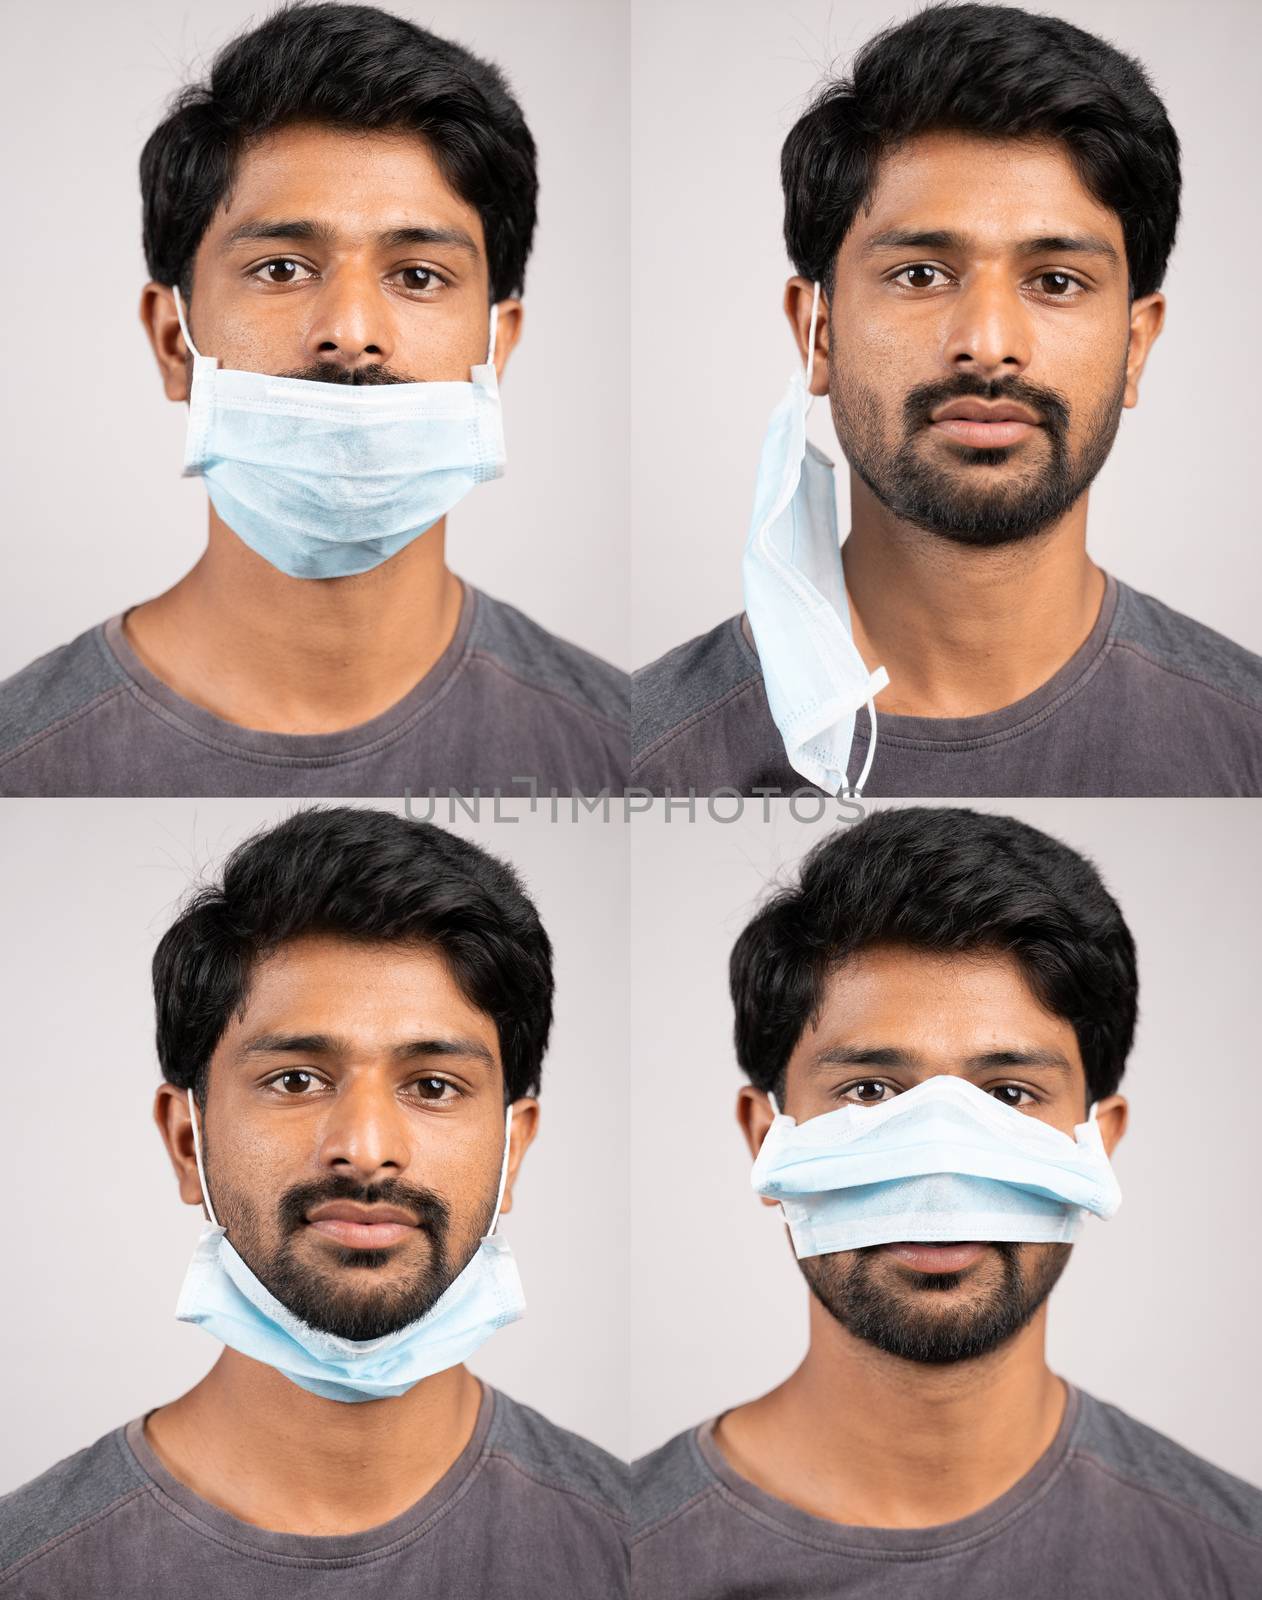 Collage of young man in improperly using surgical face masks - Awareness, safety concept to ware mask properly, to protect from coronavirus or covid-19 outbreak by lakshmiprasad.maski@gmai.com